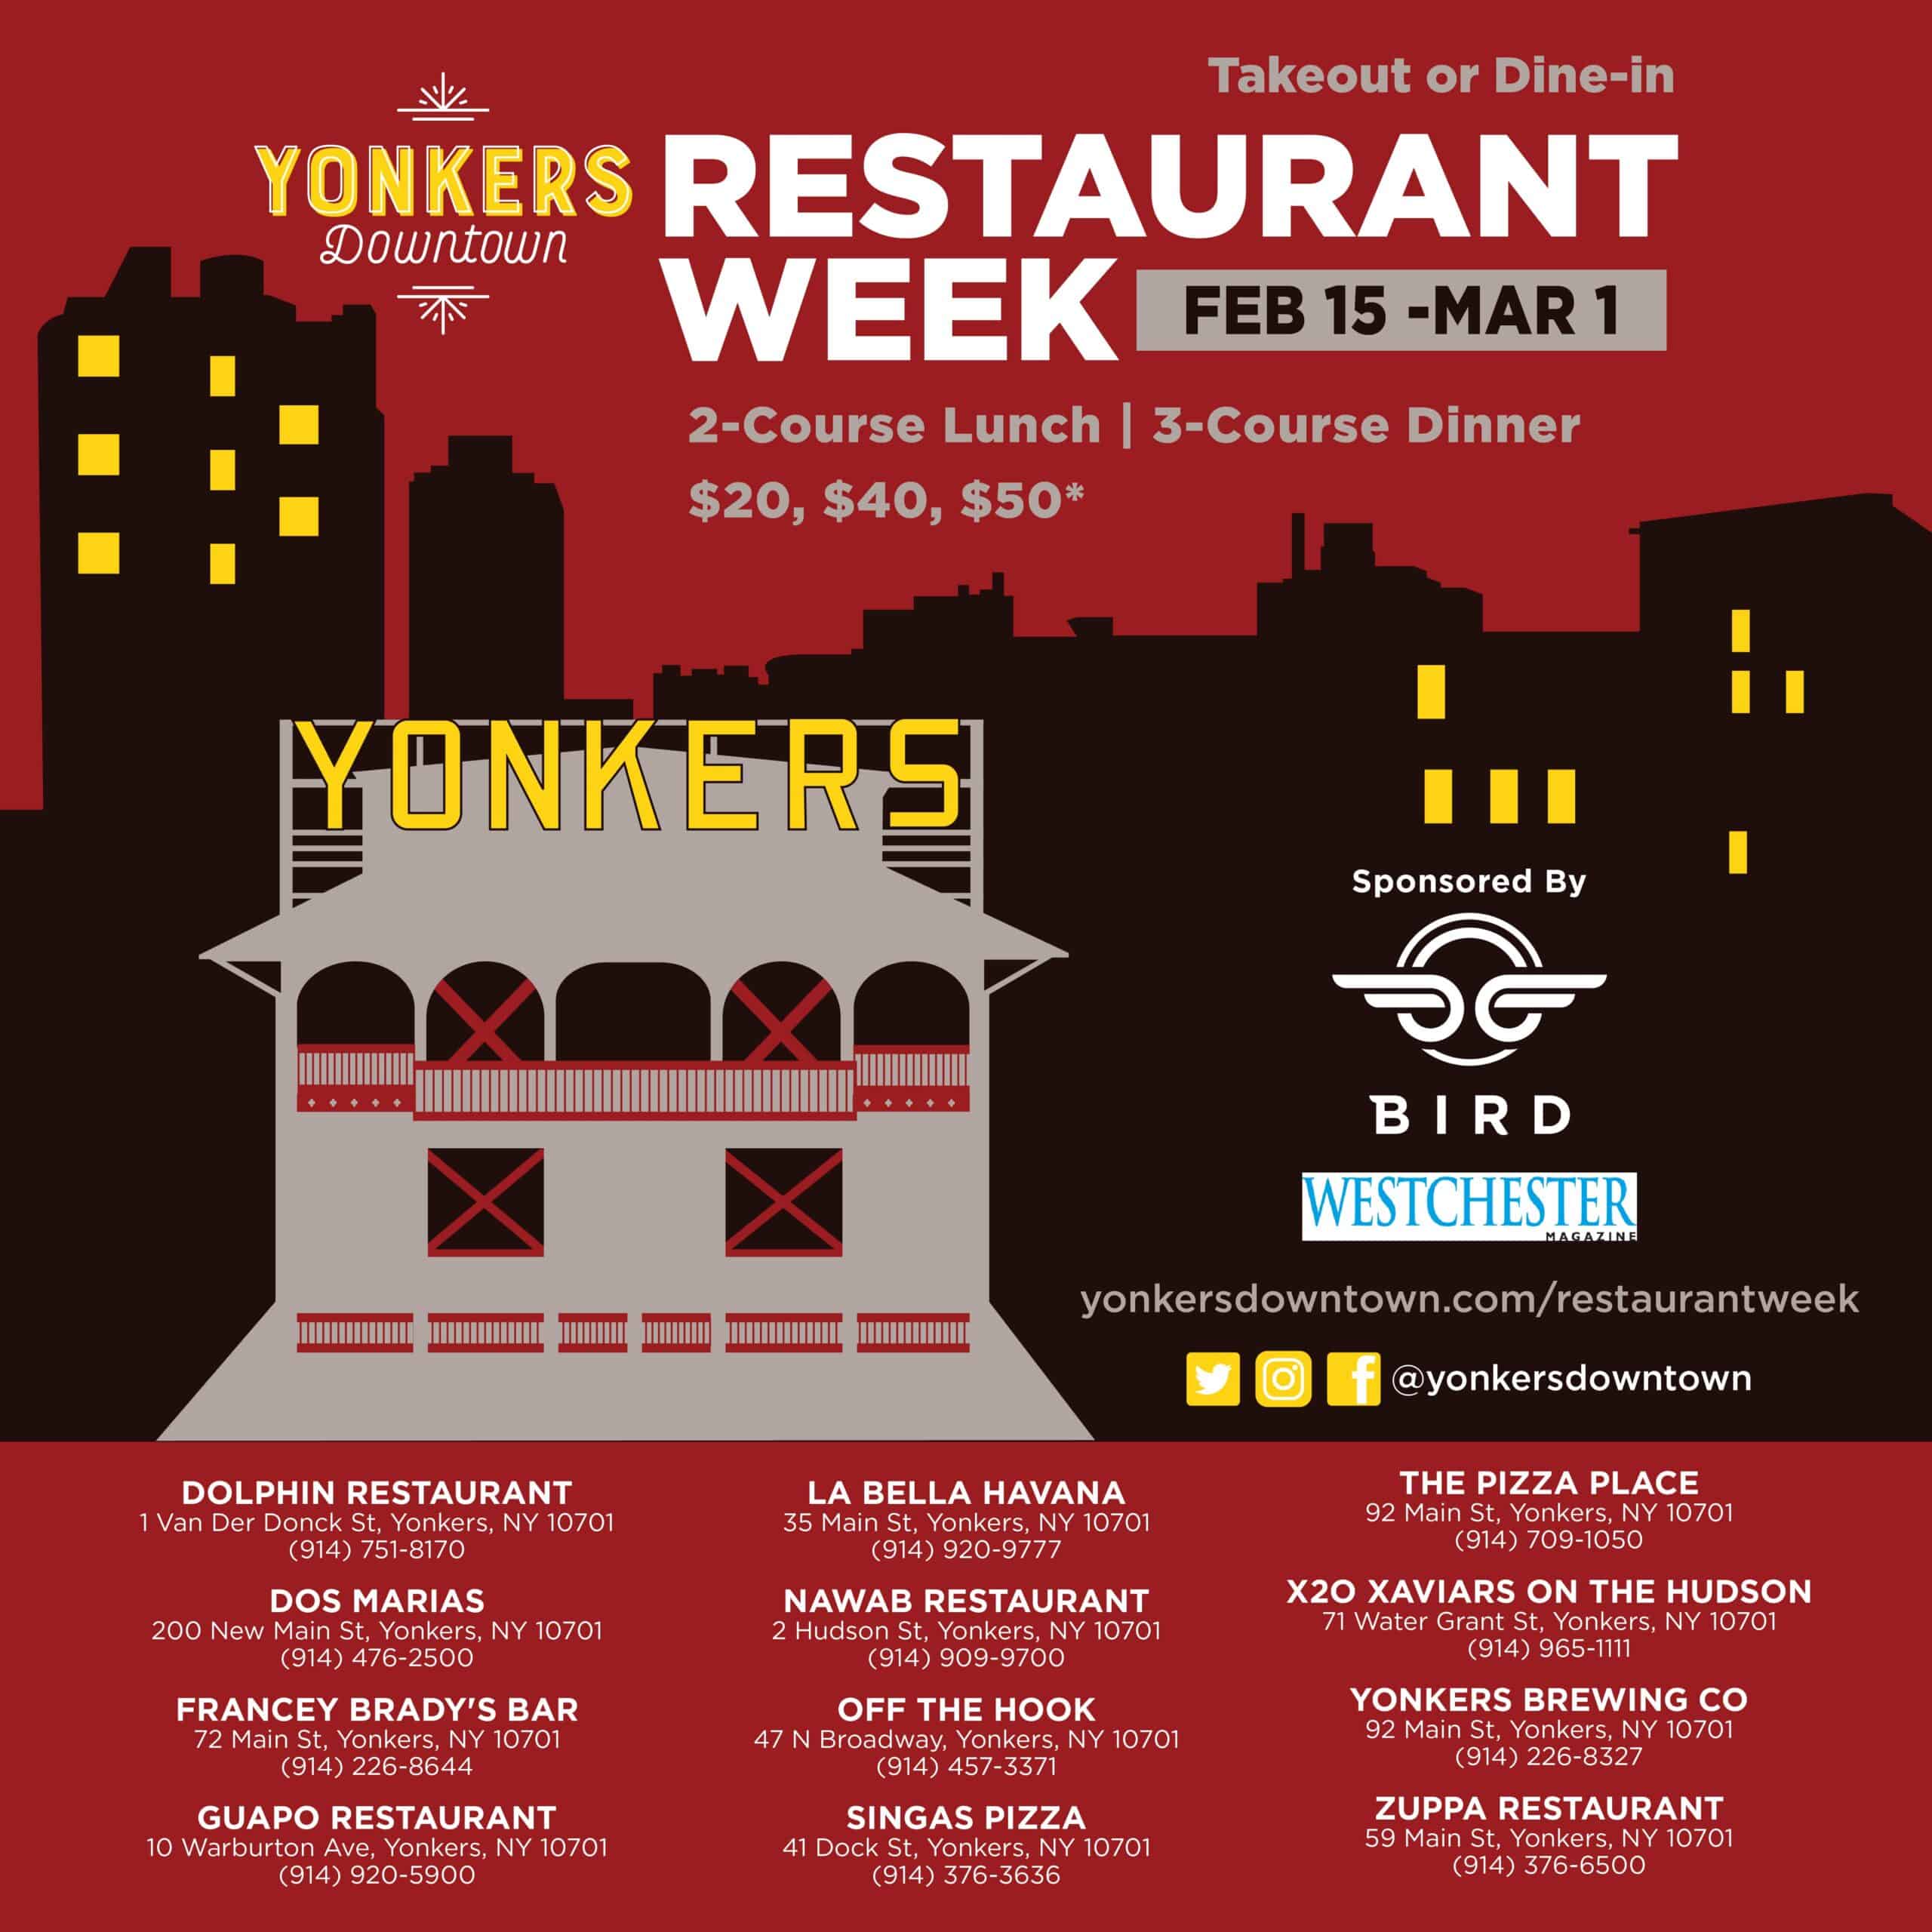 Yonkers Downtown Restaurant Week Returns Through March 1; 20 Lunches